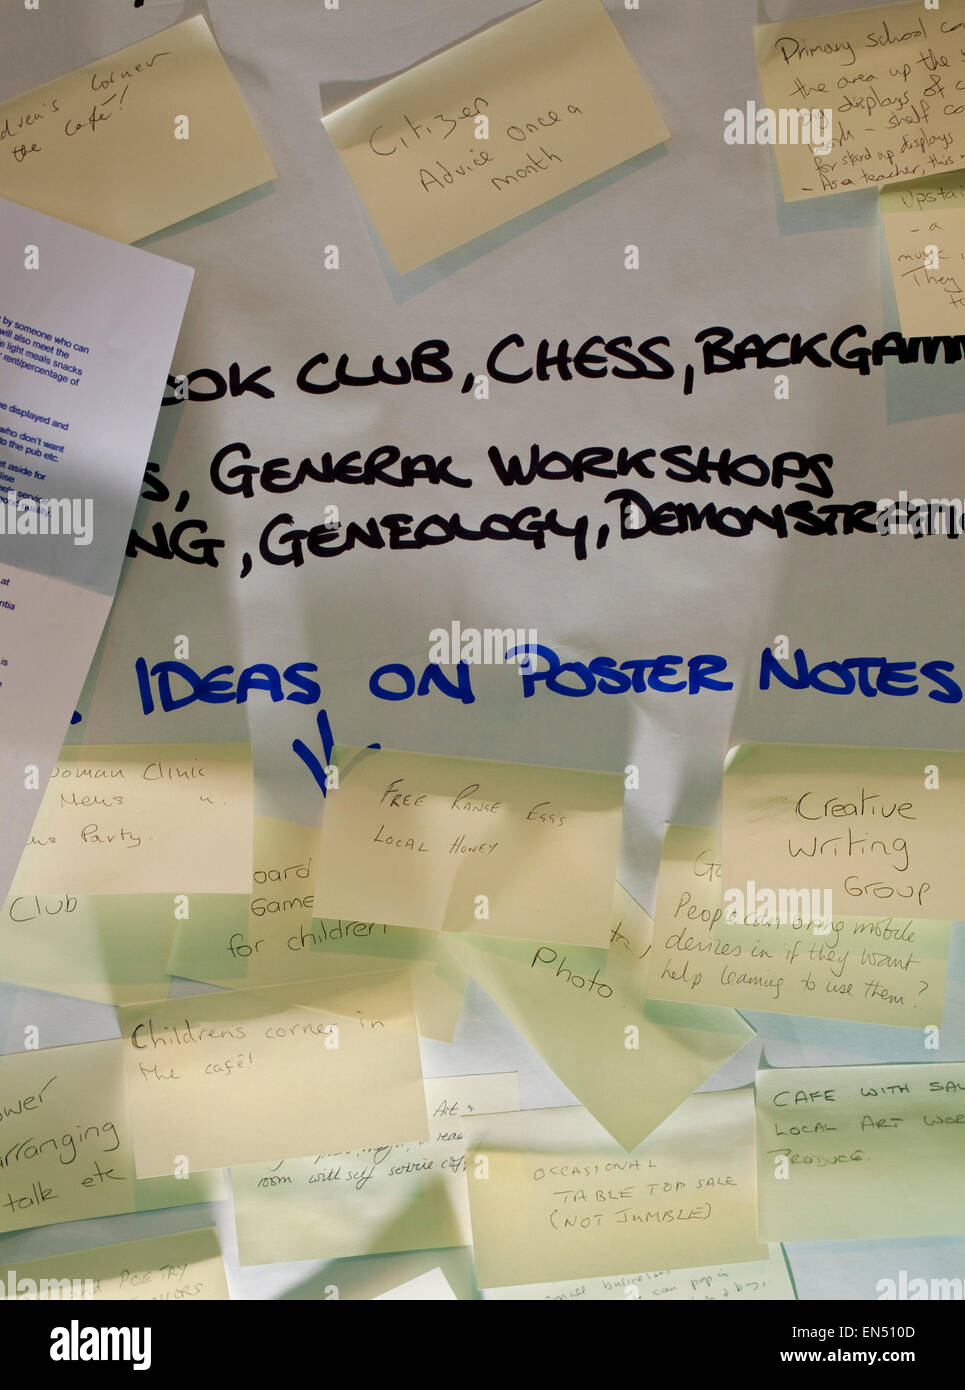 Underlit suggestion post-it notes/stickies on a community centre center noticeboard Stock Photo